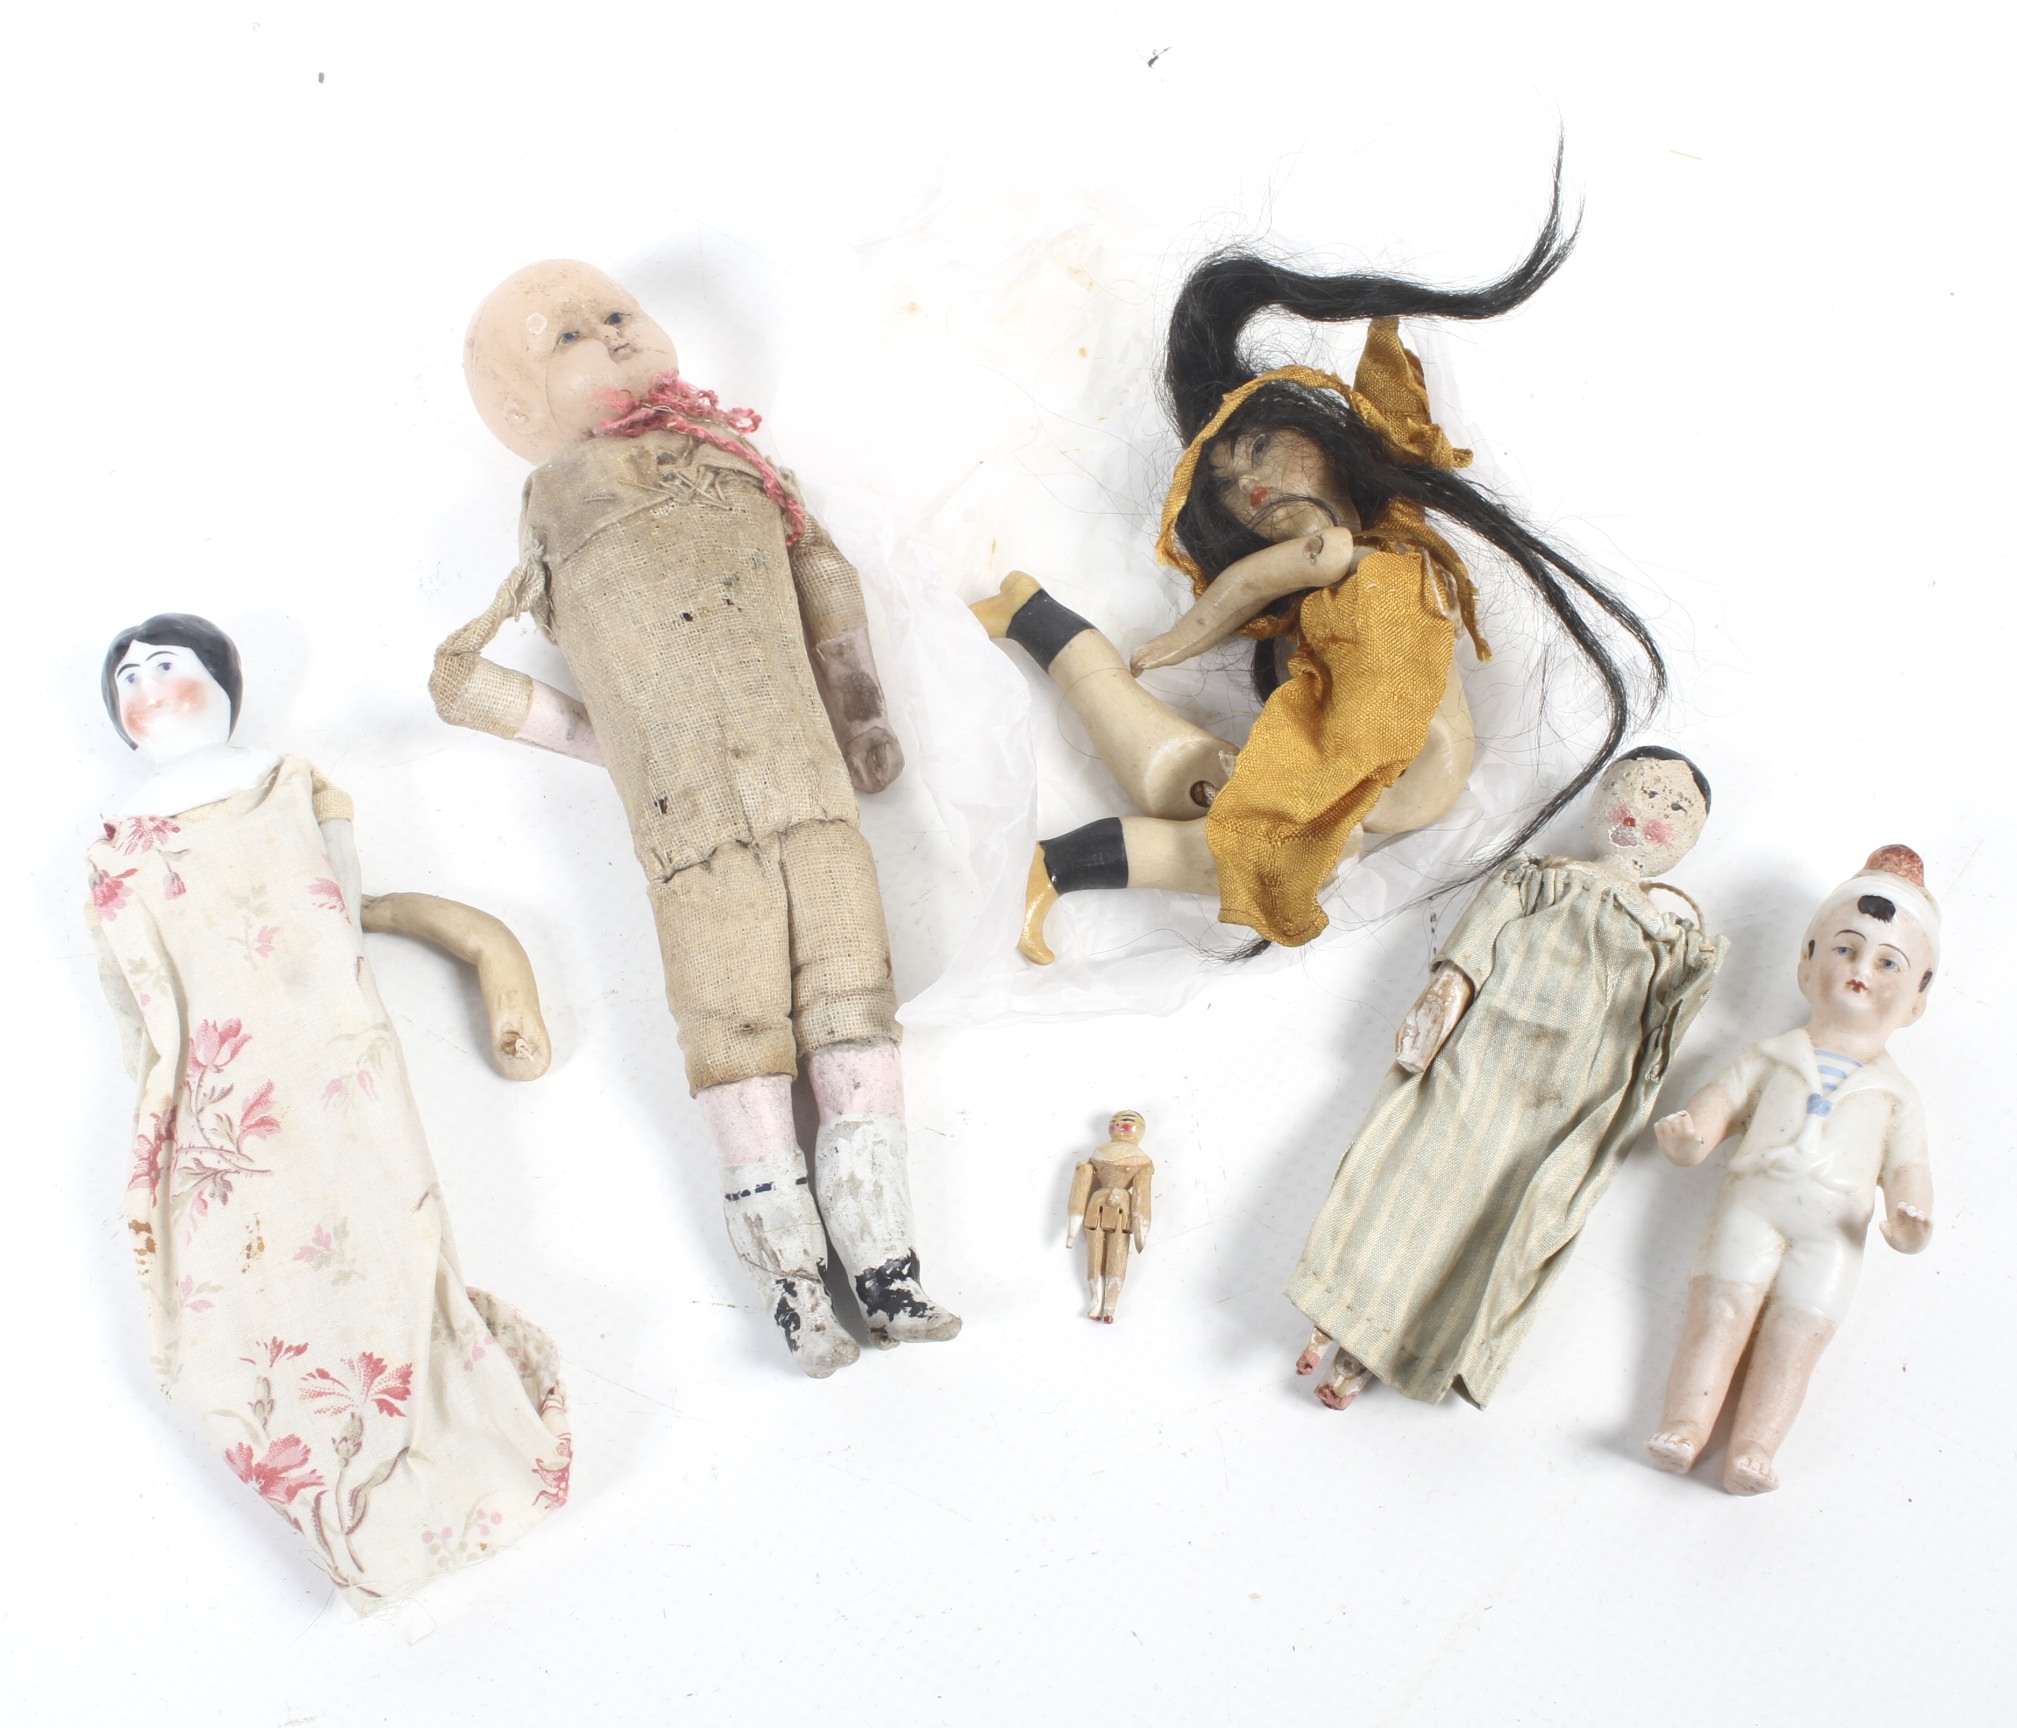 A collection of small vintage dolls.